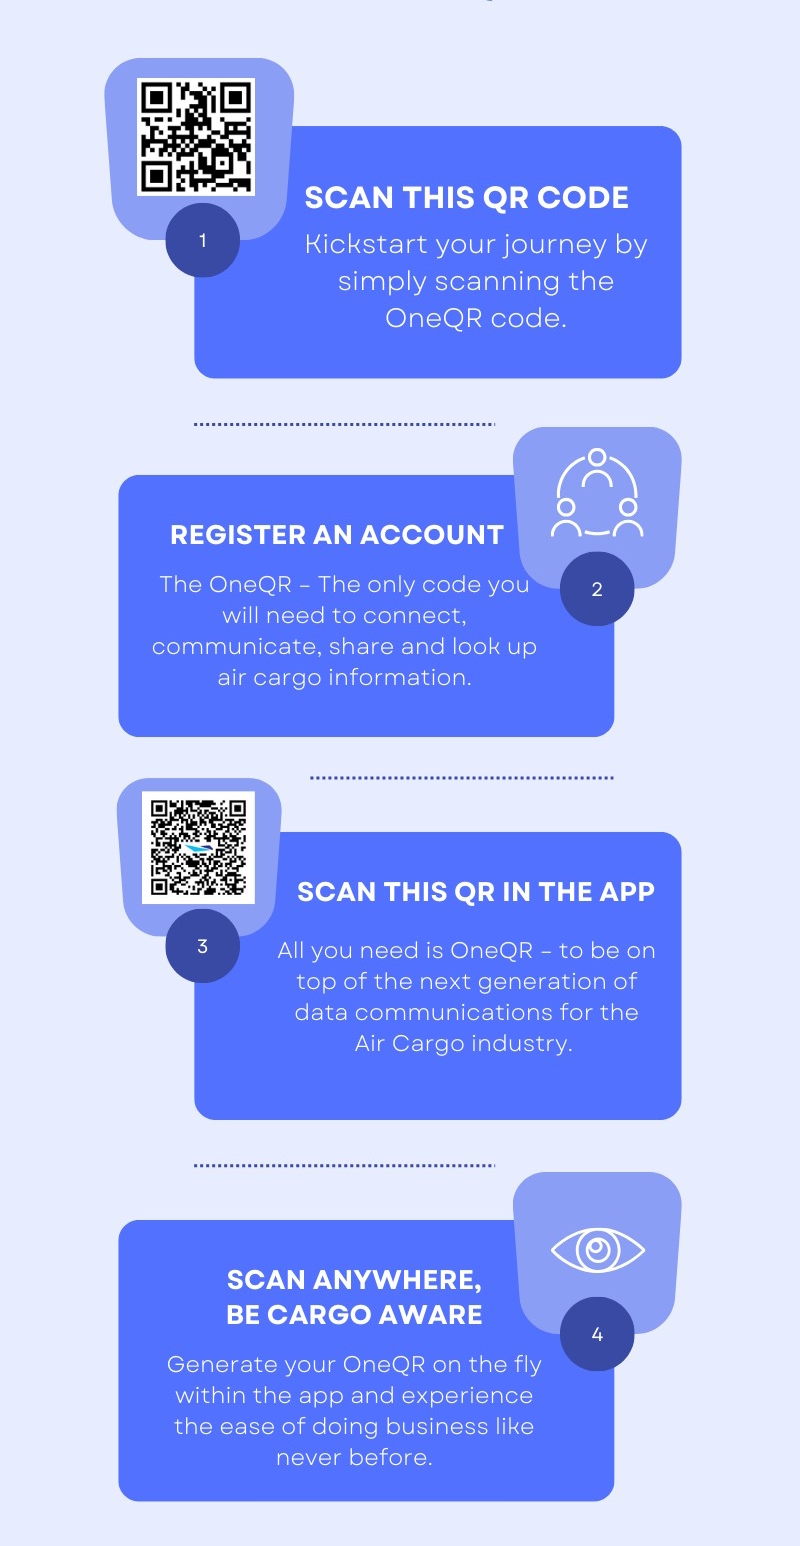 Scan the QR code to register for a OneShipper account